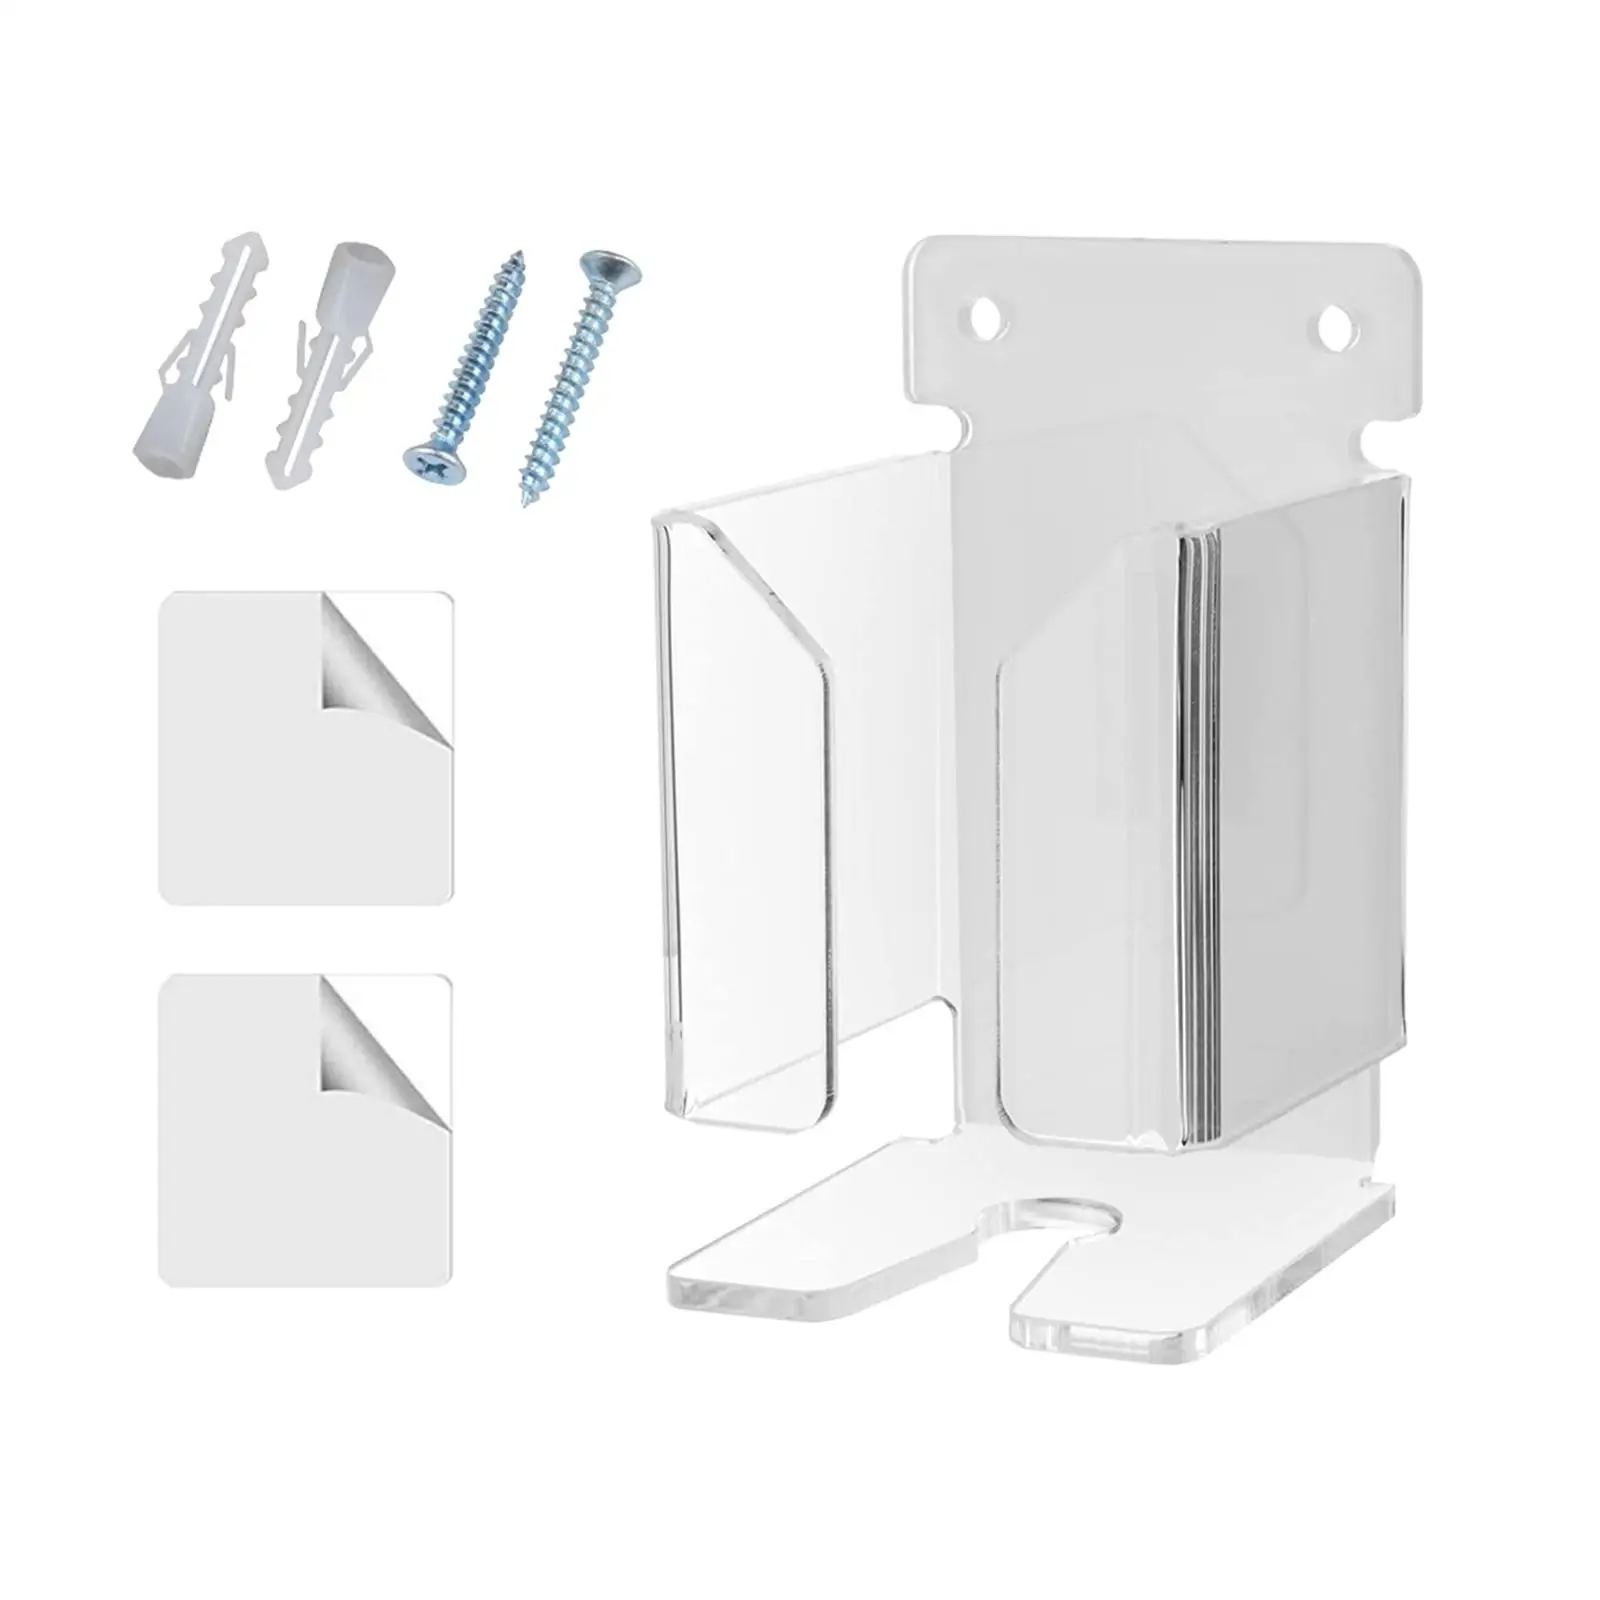 Electric Shaver Wall Mount Holder Rack Toothpaste Shaver Storage Two Installation Utility Shaver Organizer for Shower Bathroom